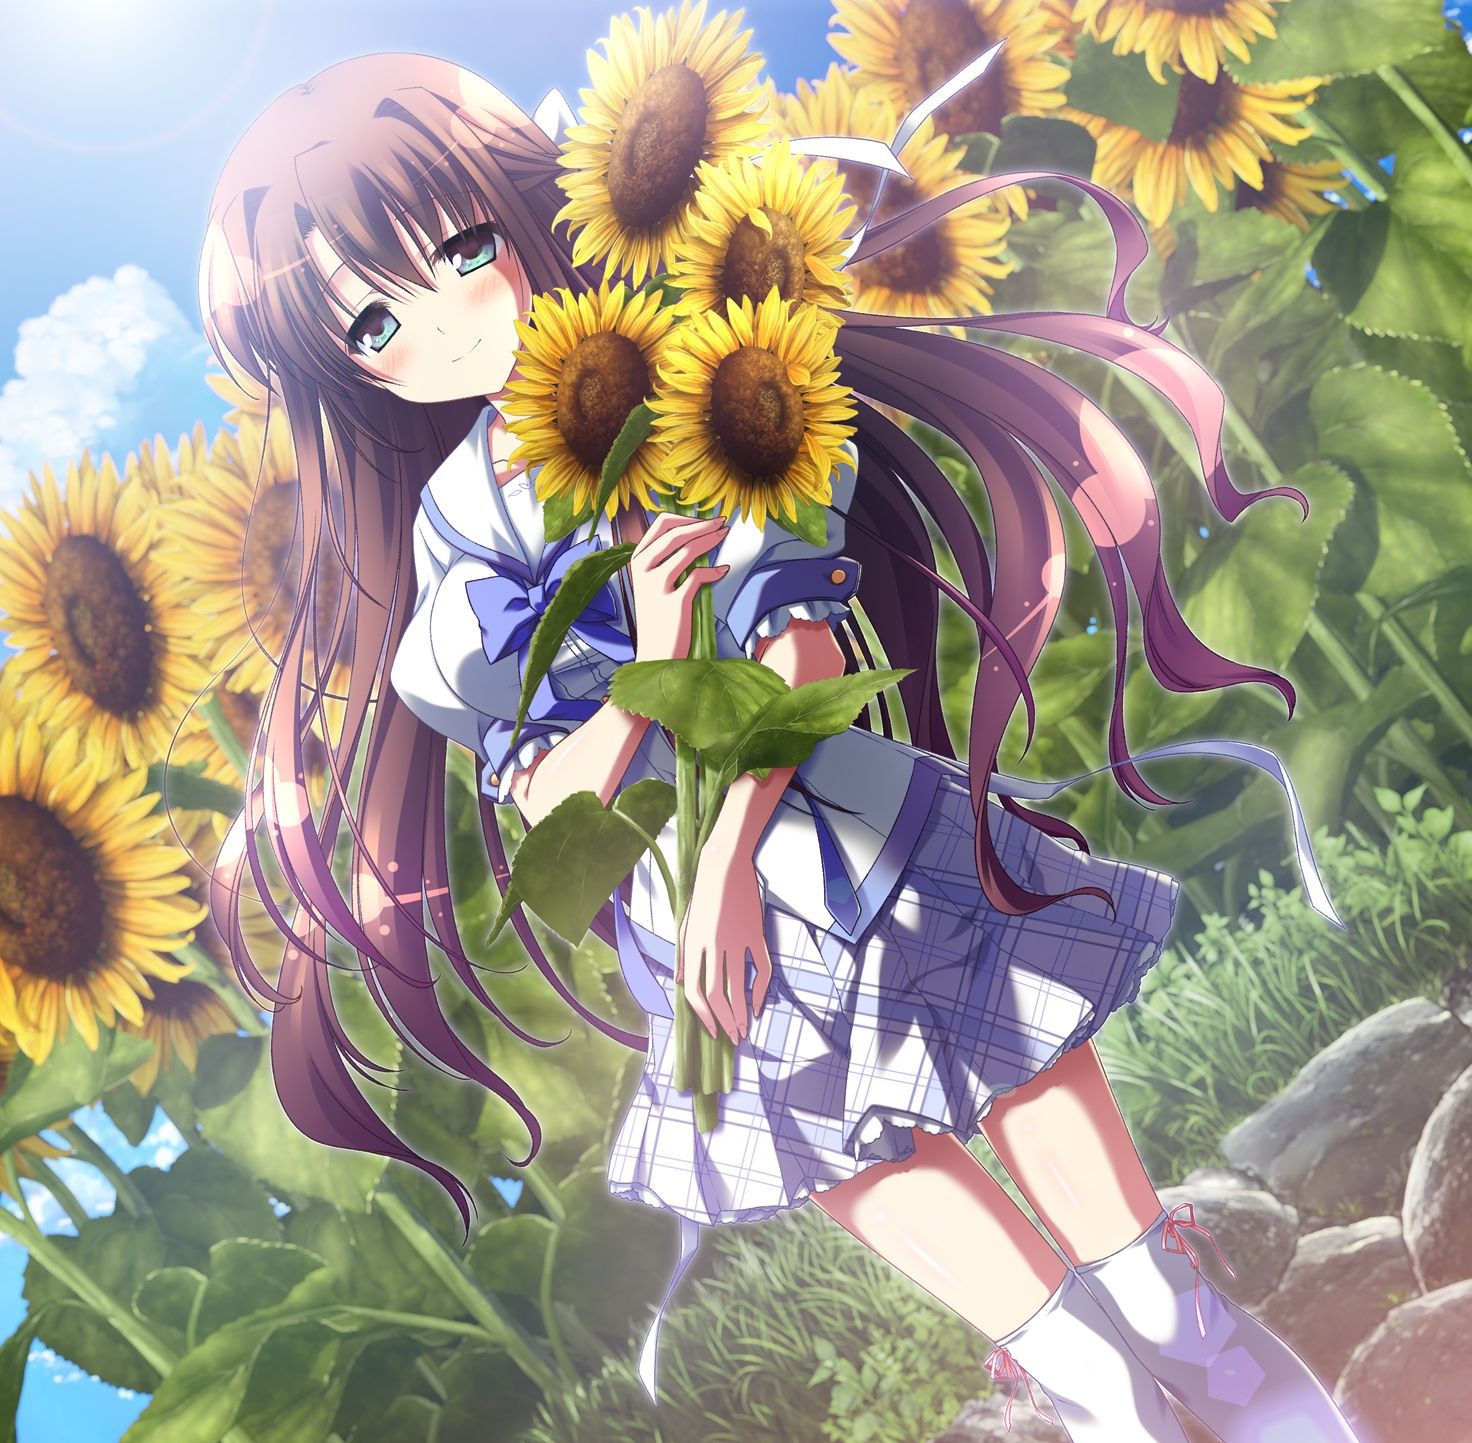 [Secondary, ZIP] summer 2: girl with a sunflower or image summary 12